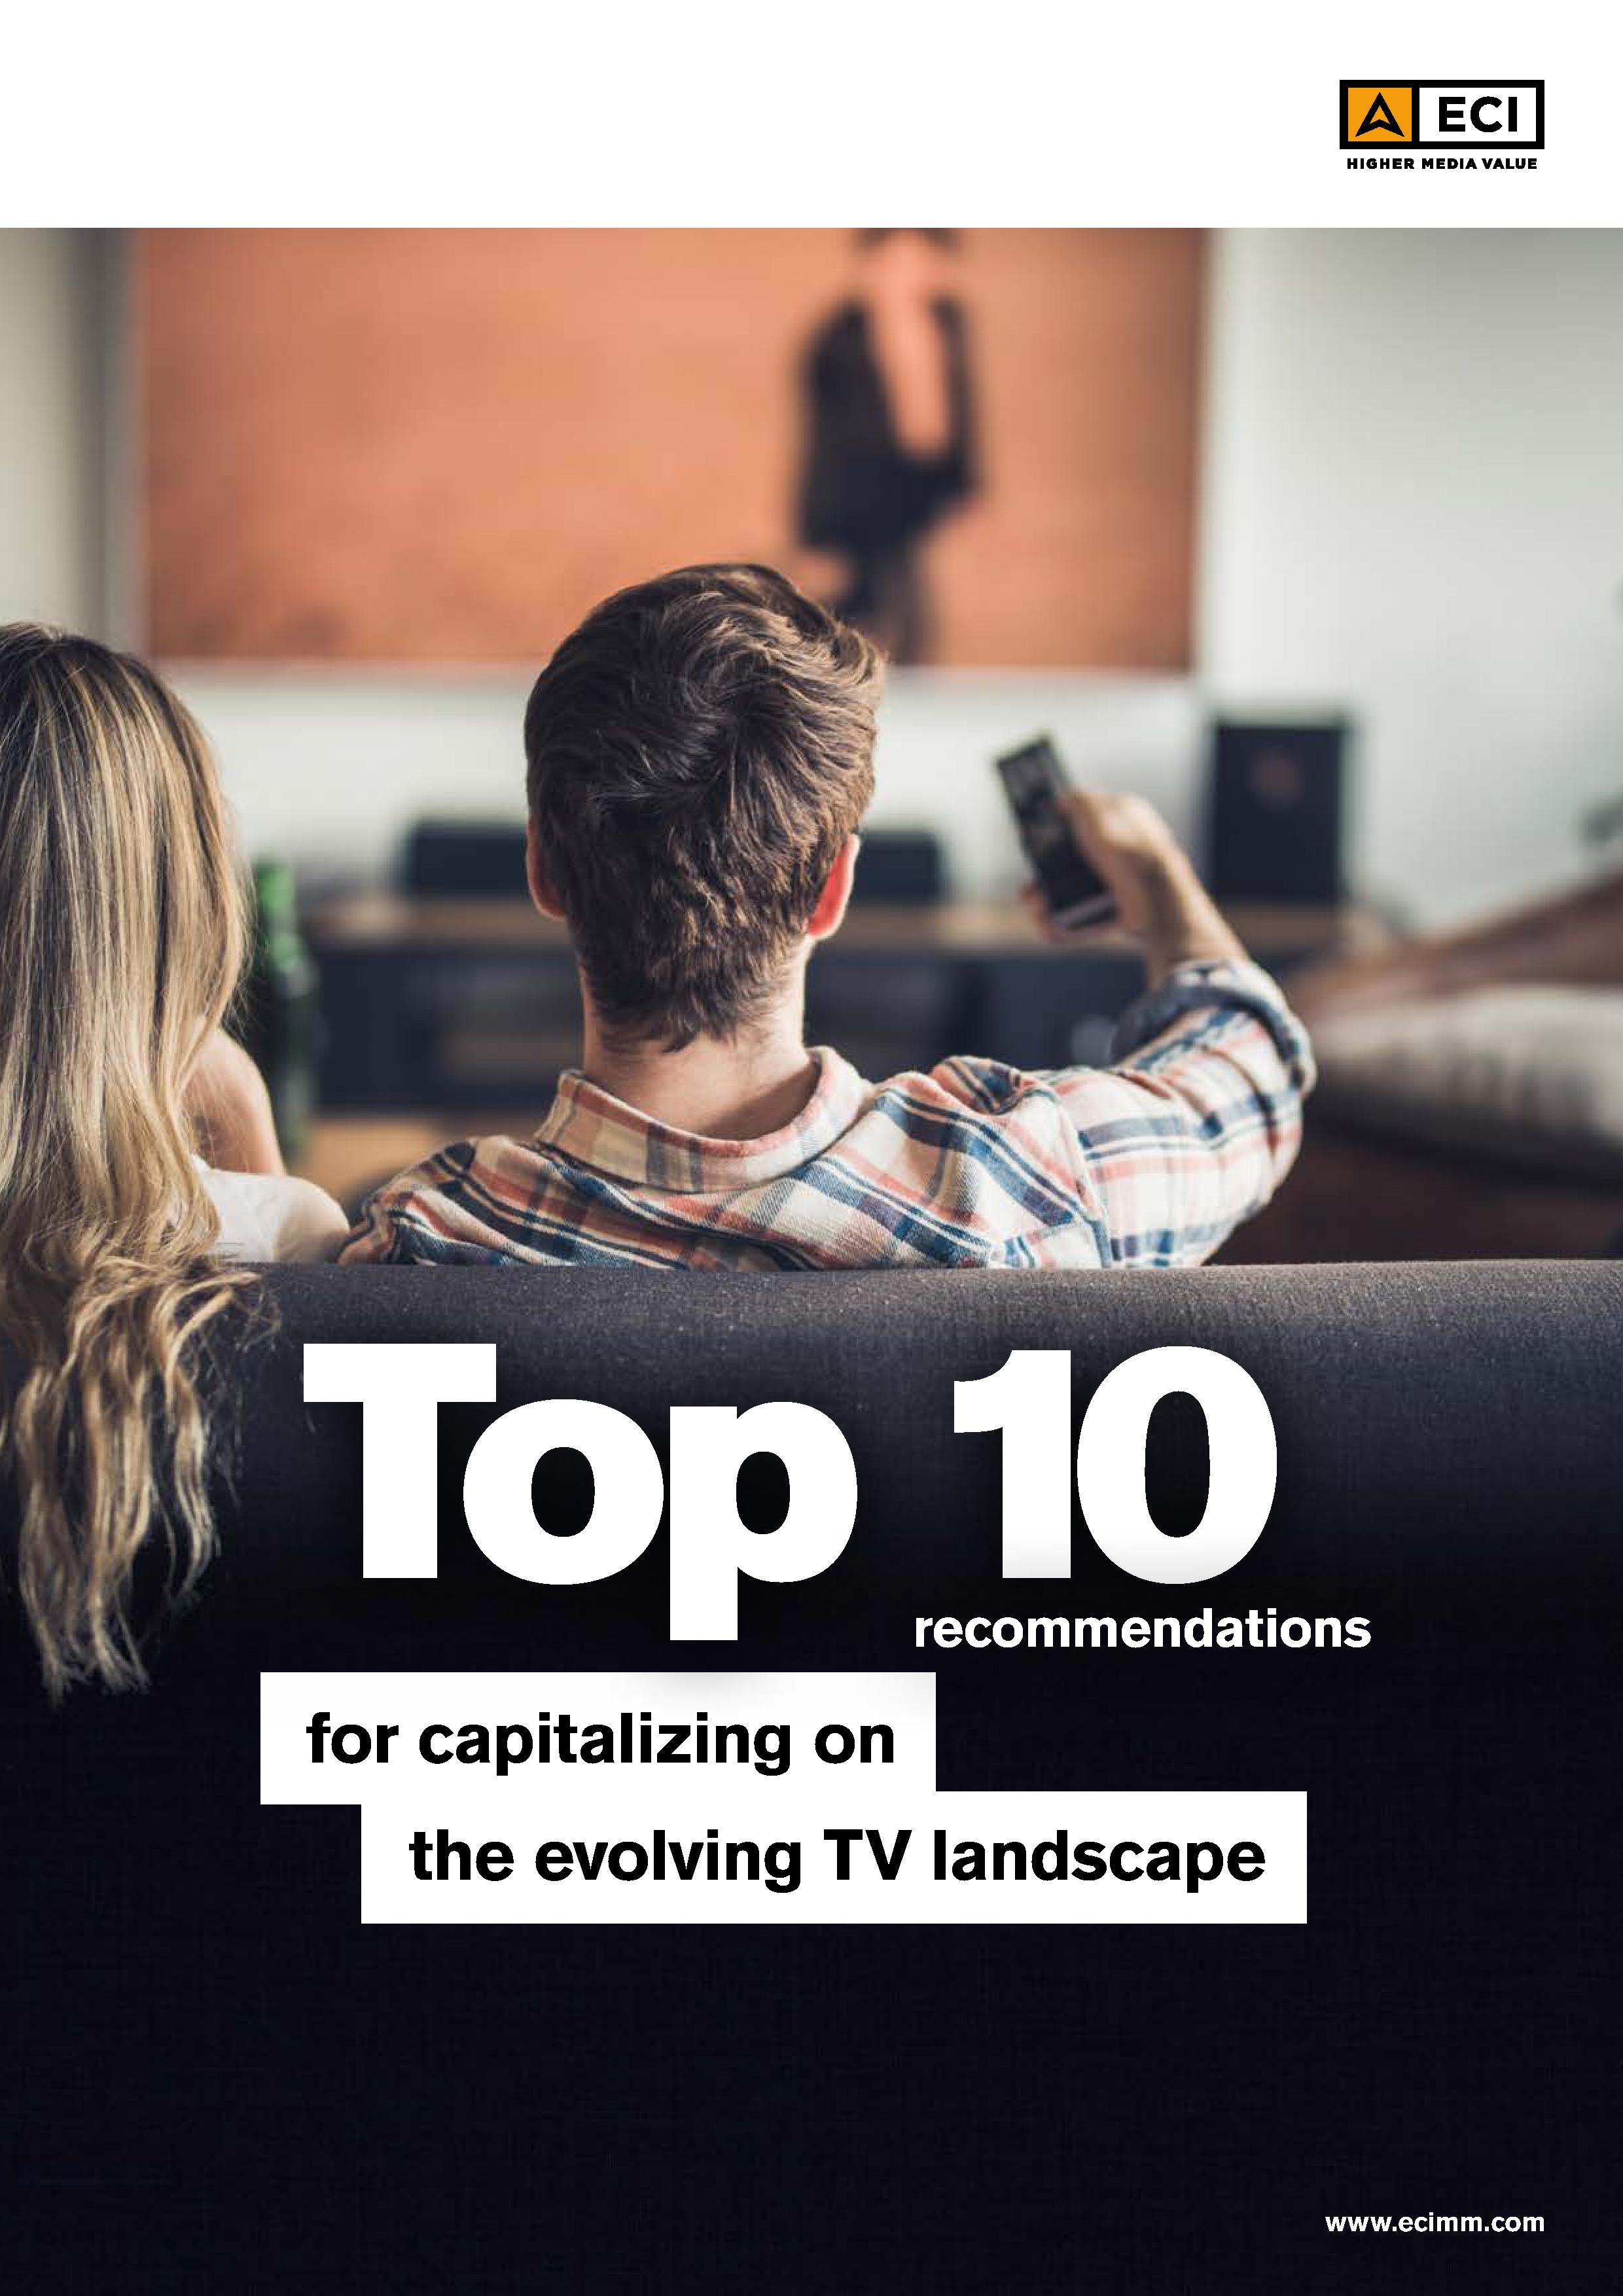 ECI’s Top 10 recommendations for capitalizing on the evolving TV landscape